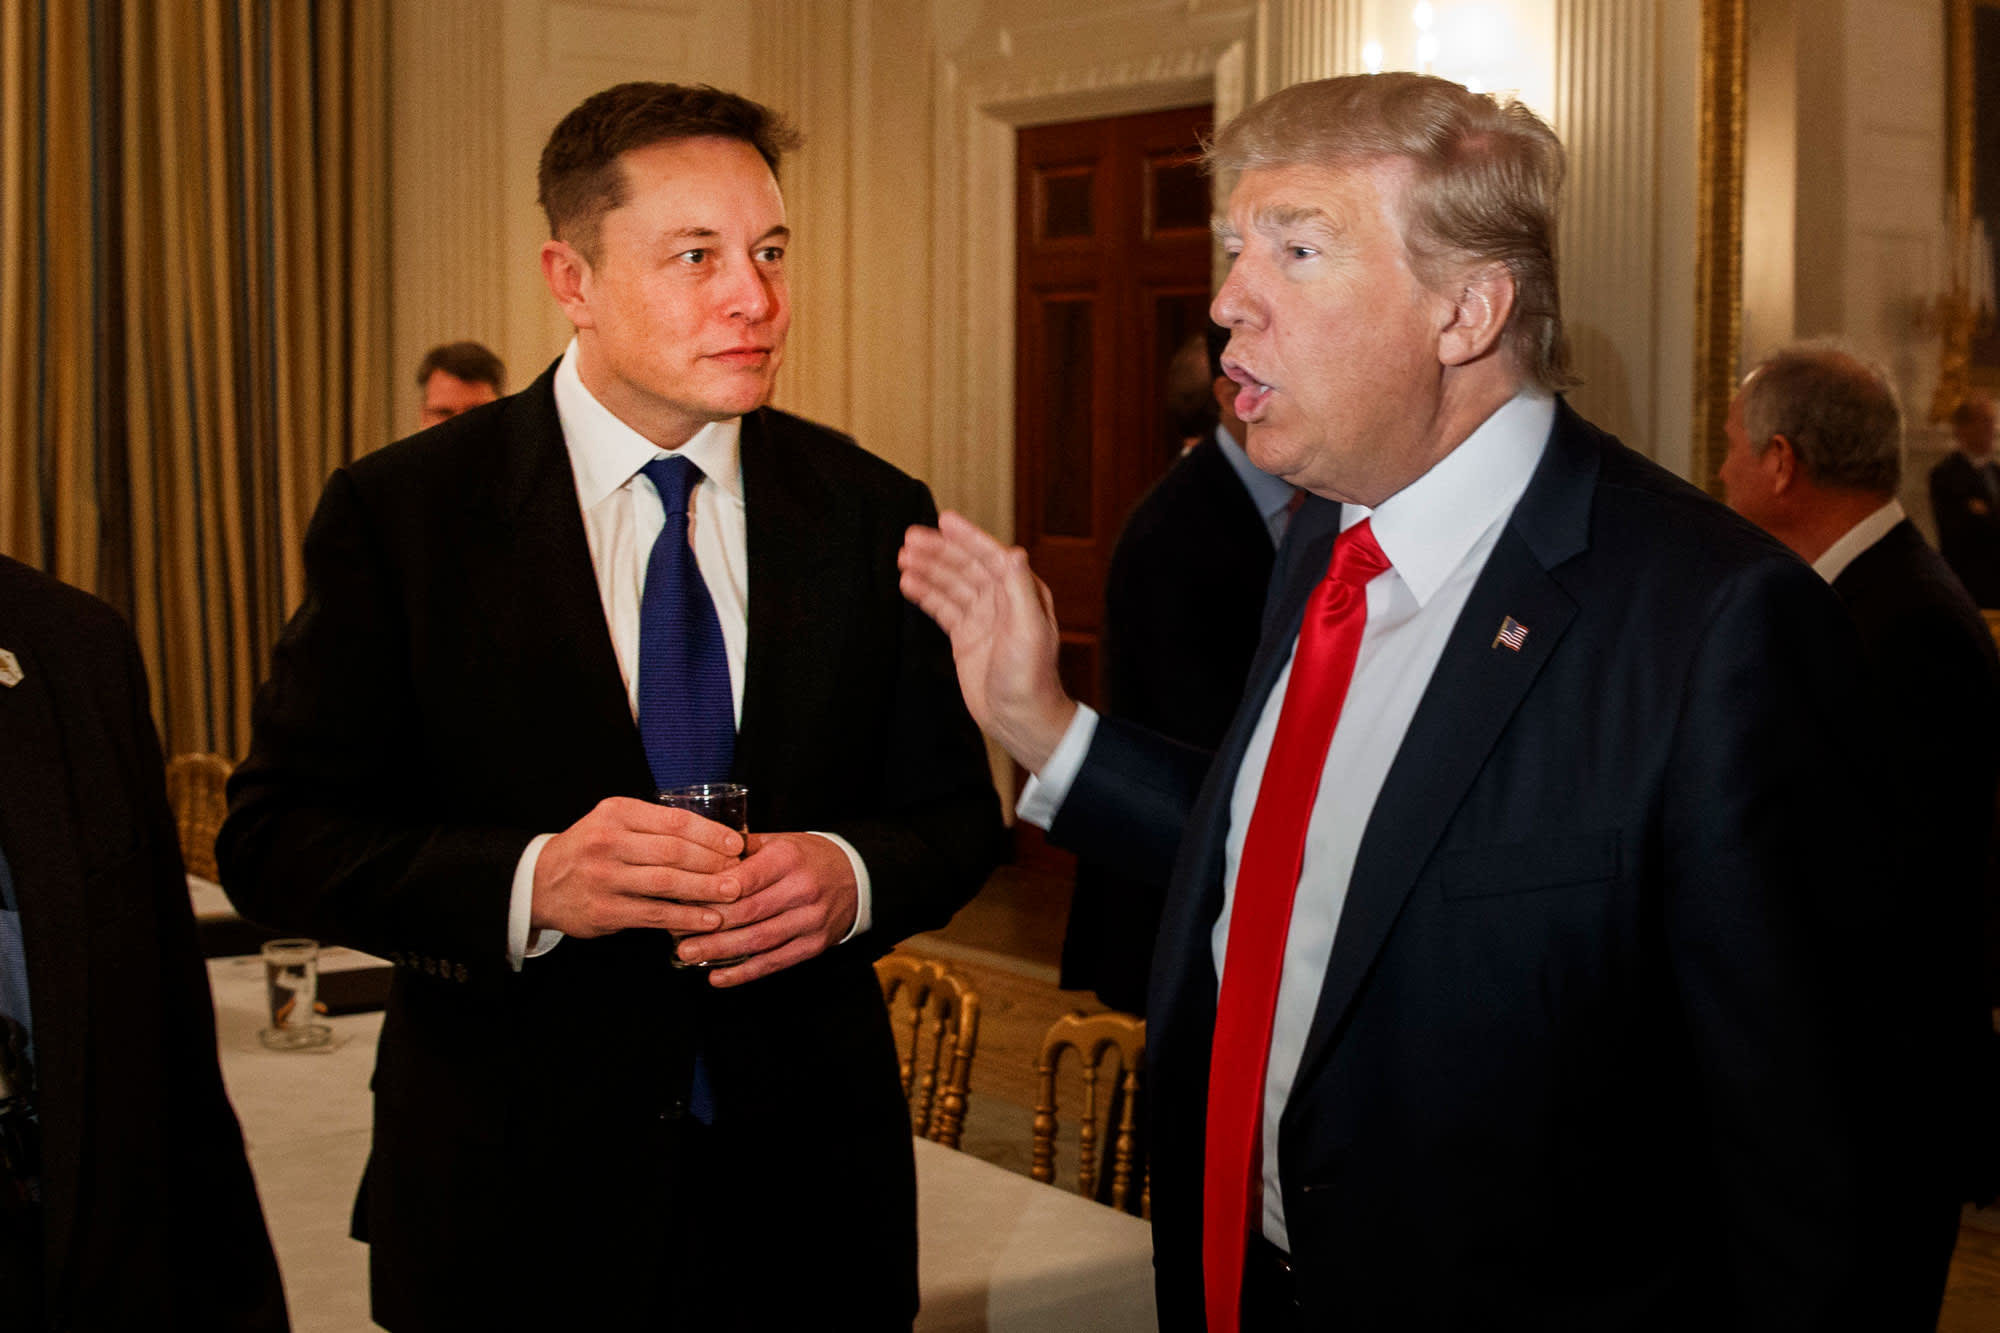 Trump says Elon Musk is like Thomas Edison: one of our 'great geniuses'